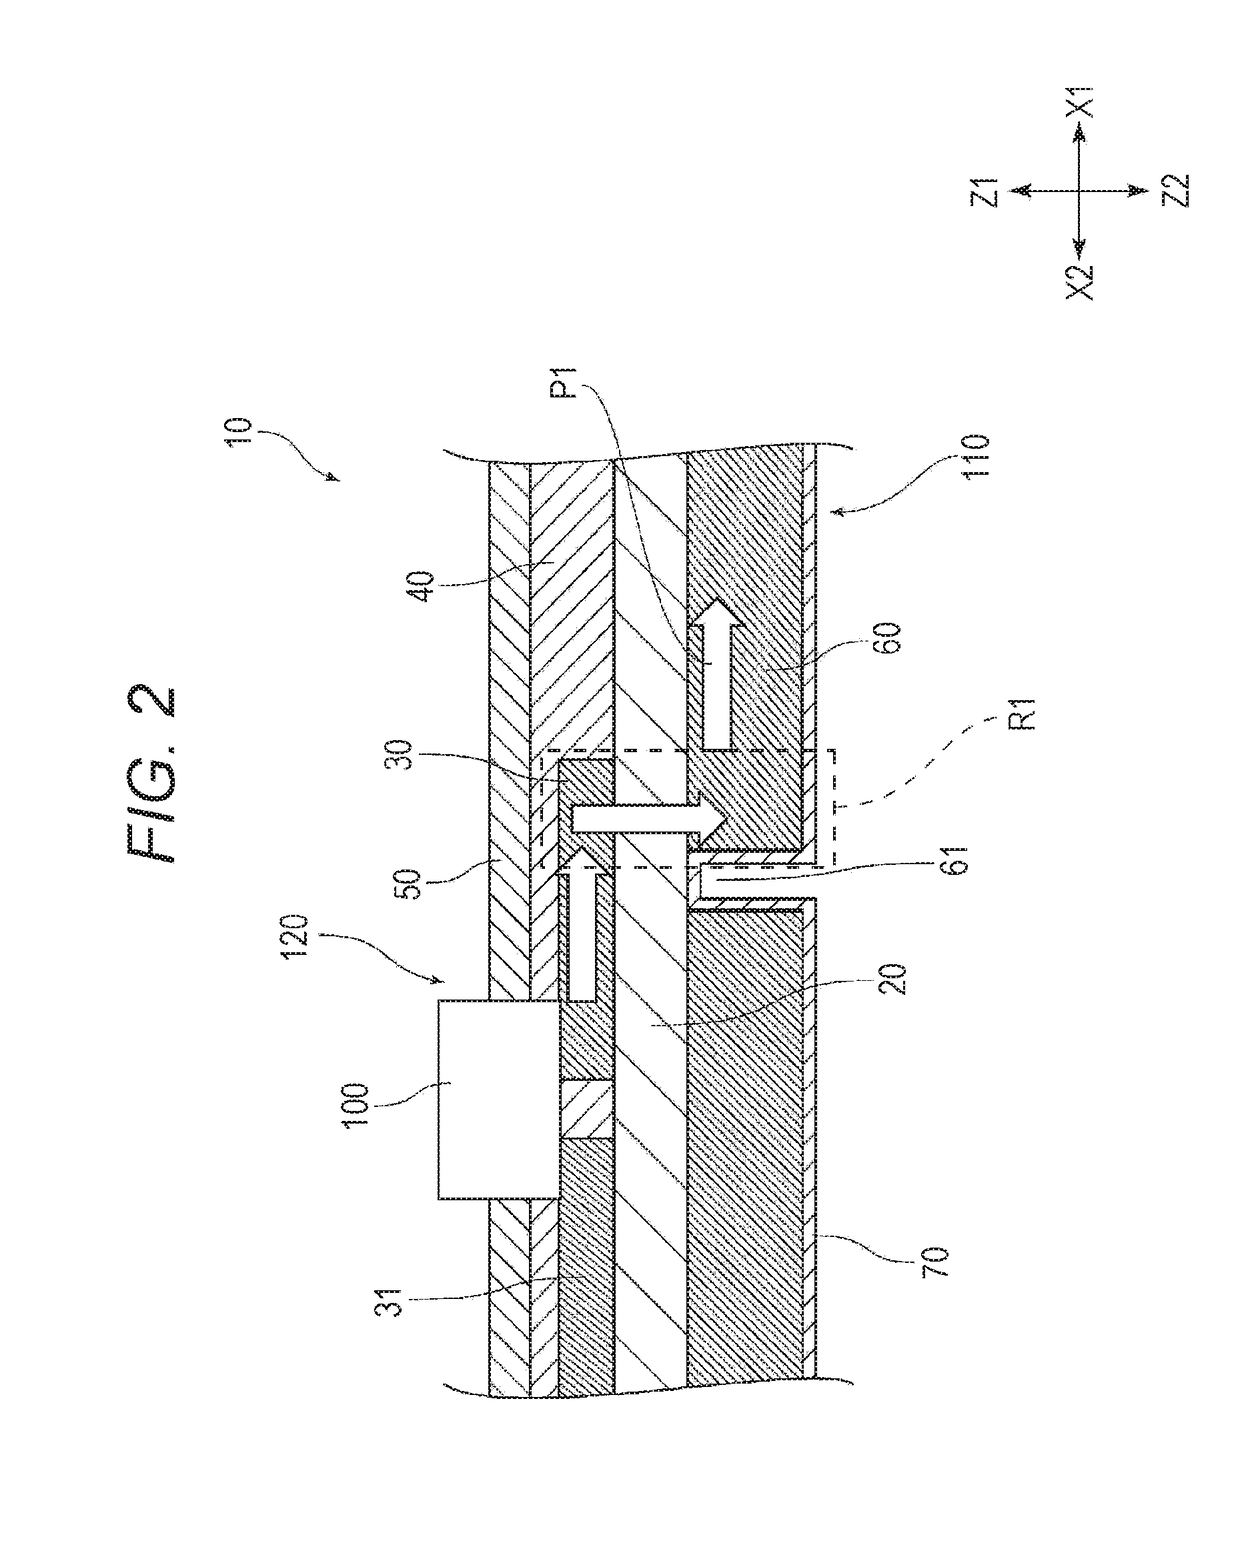 Flexible printed board and method for manufacturing flexible printed board